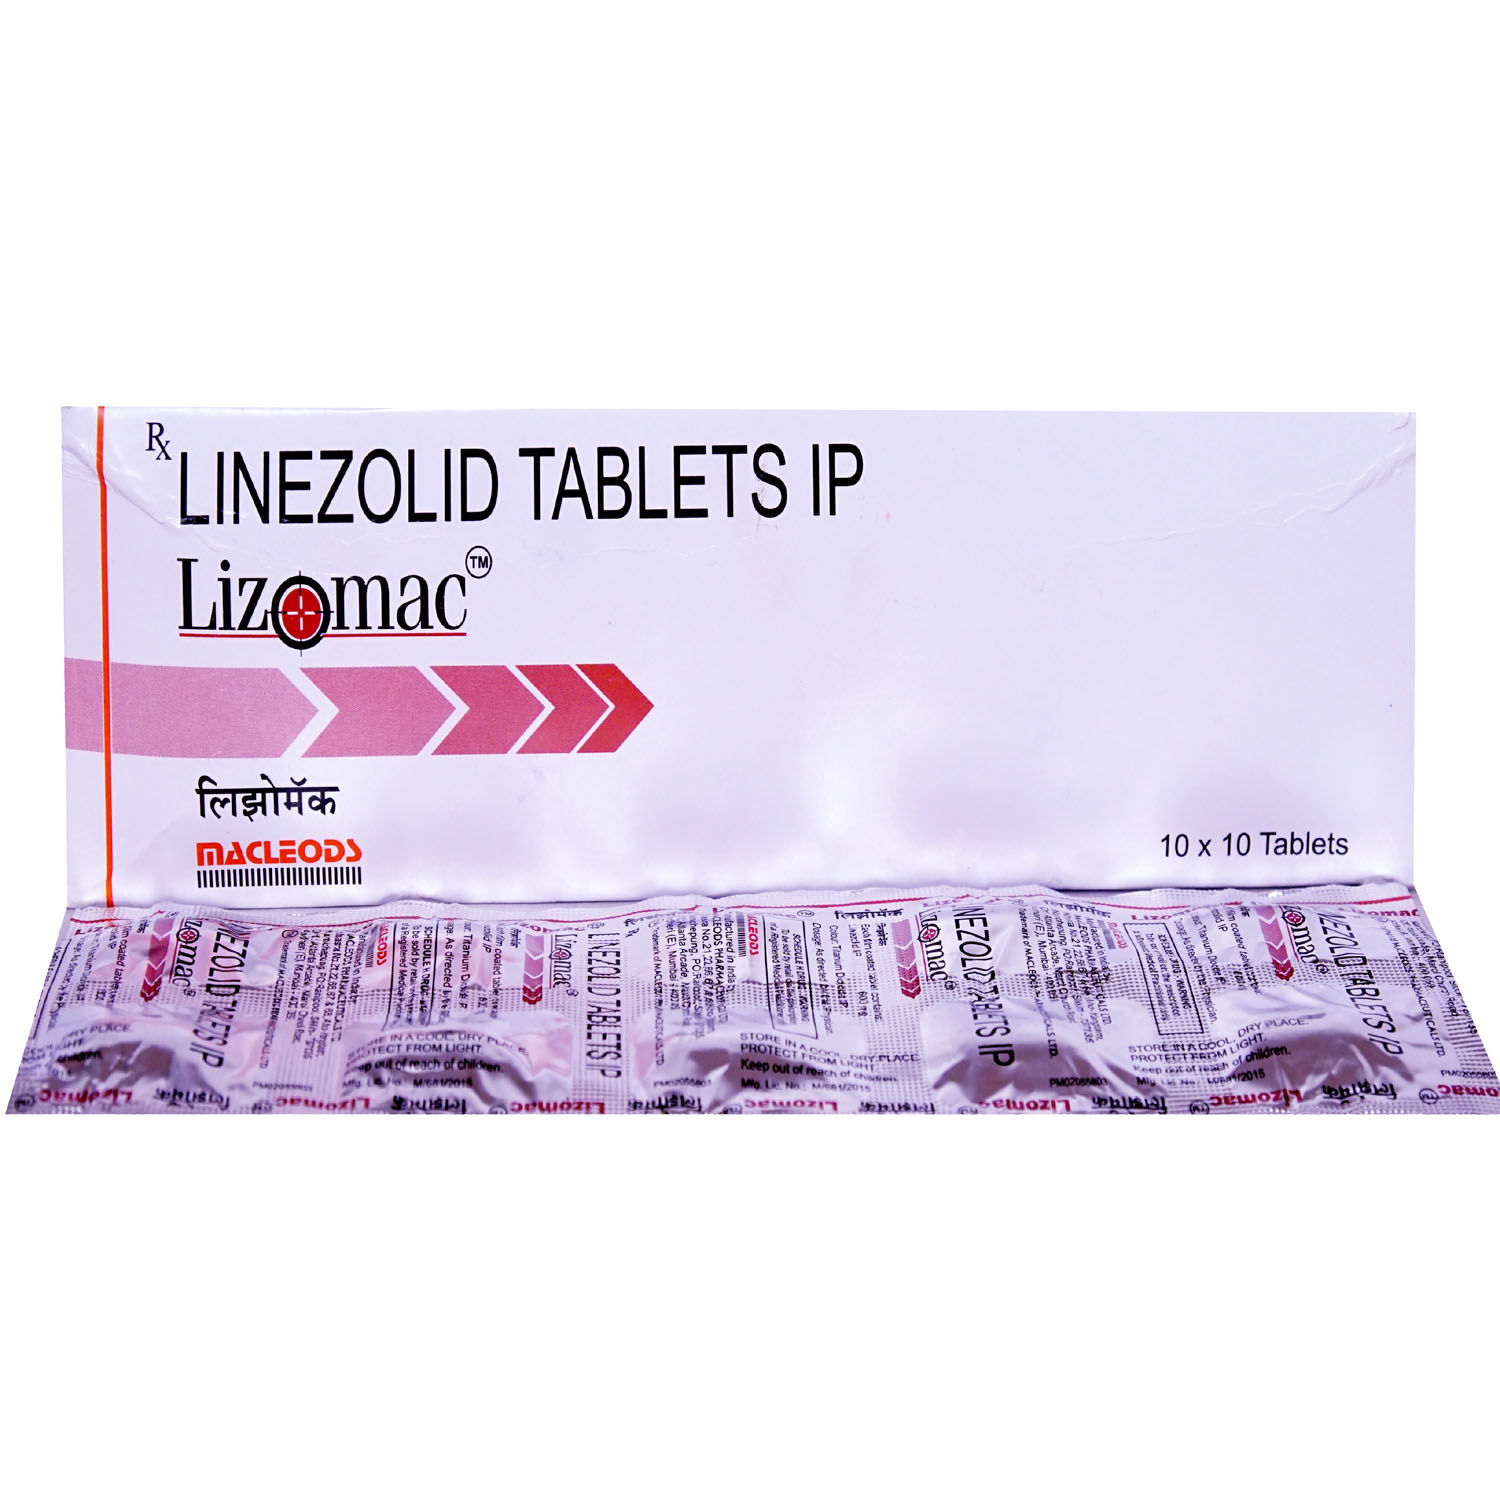 what foods to avoid when taking linezolid